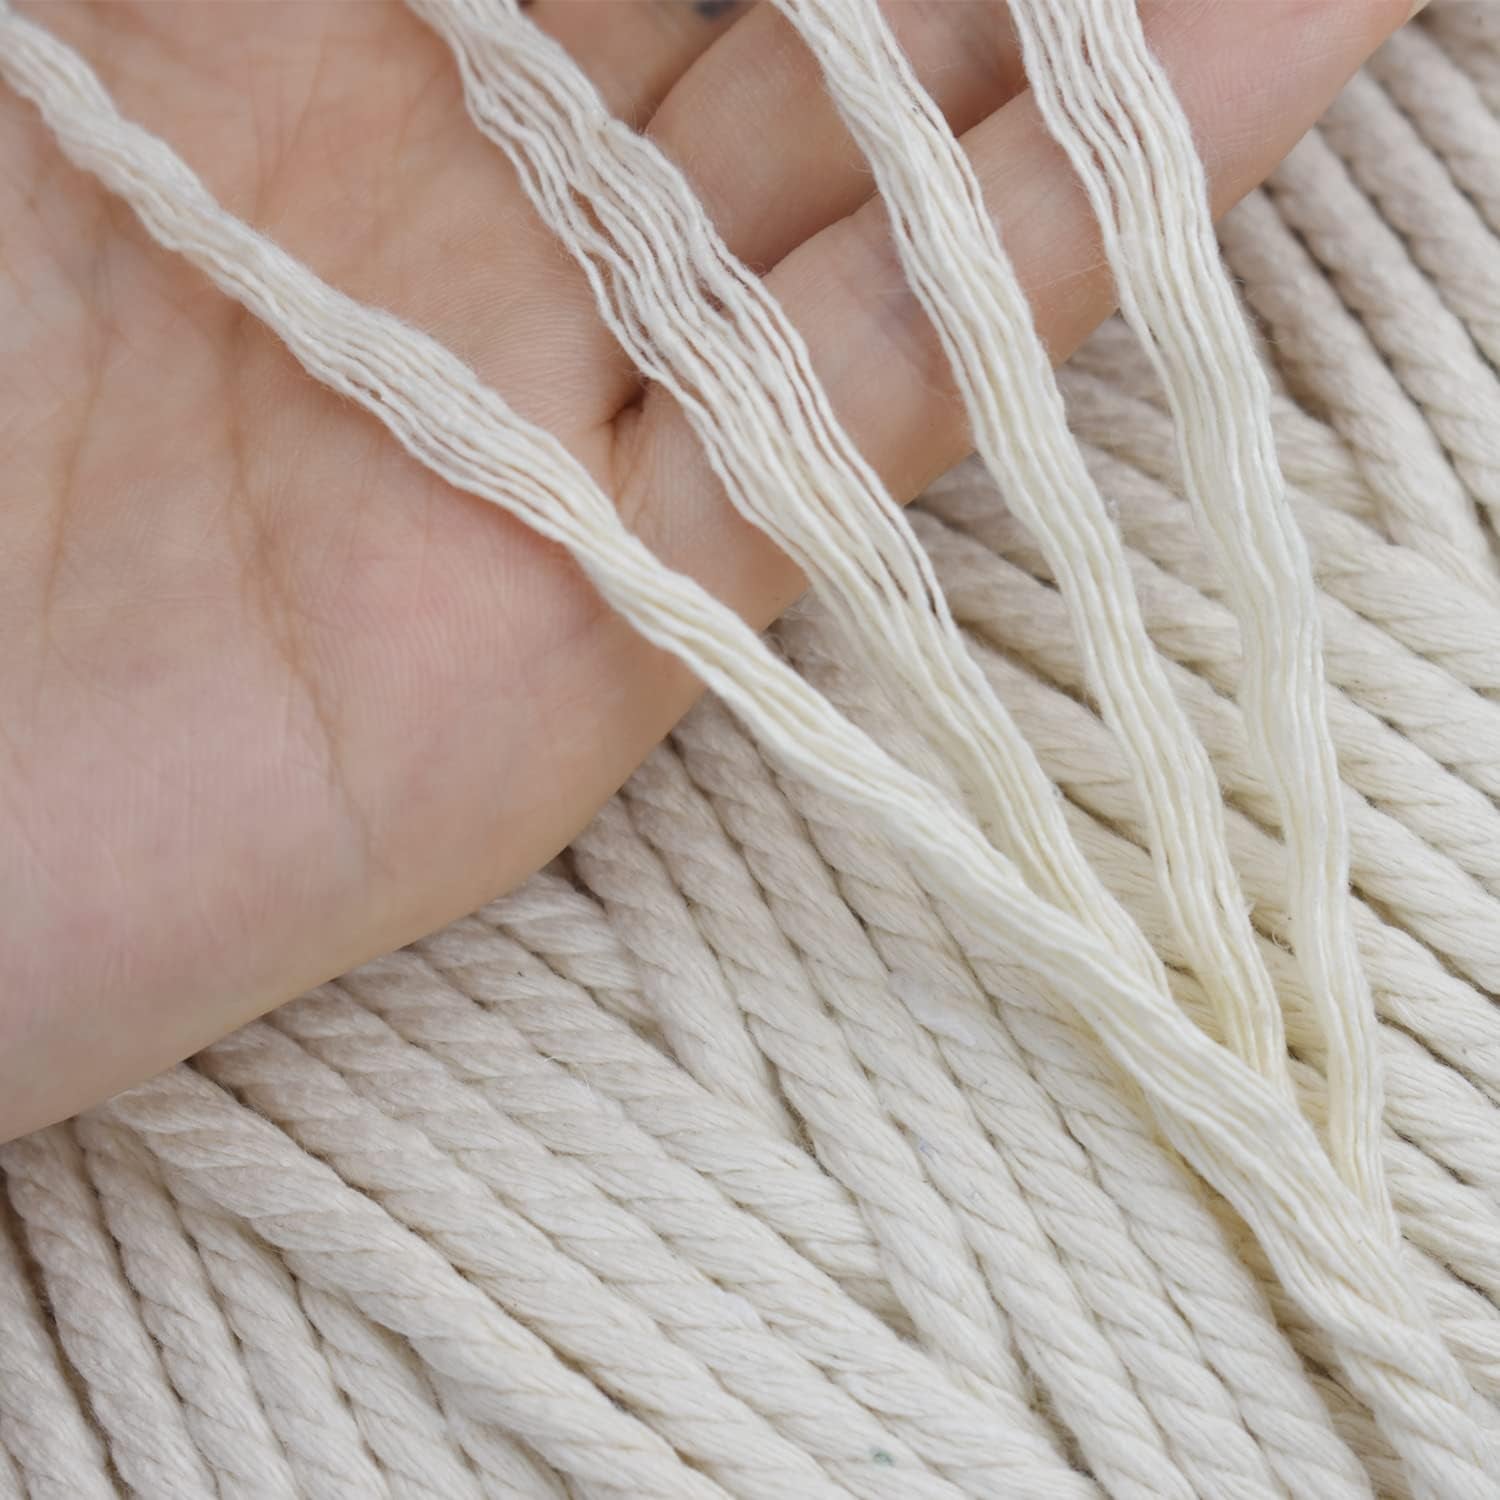 5Mm×436Yd Macrame Cotton Cord, Soft 4 Strand Twisted 100% Natural Cotton for Handmade Wall Hanging, DIY, Craft Making, Knitting, Plant Hangers, Decorative Projects (Beige) (5Mm×436Yd, Beige)